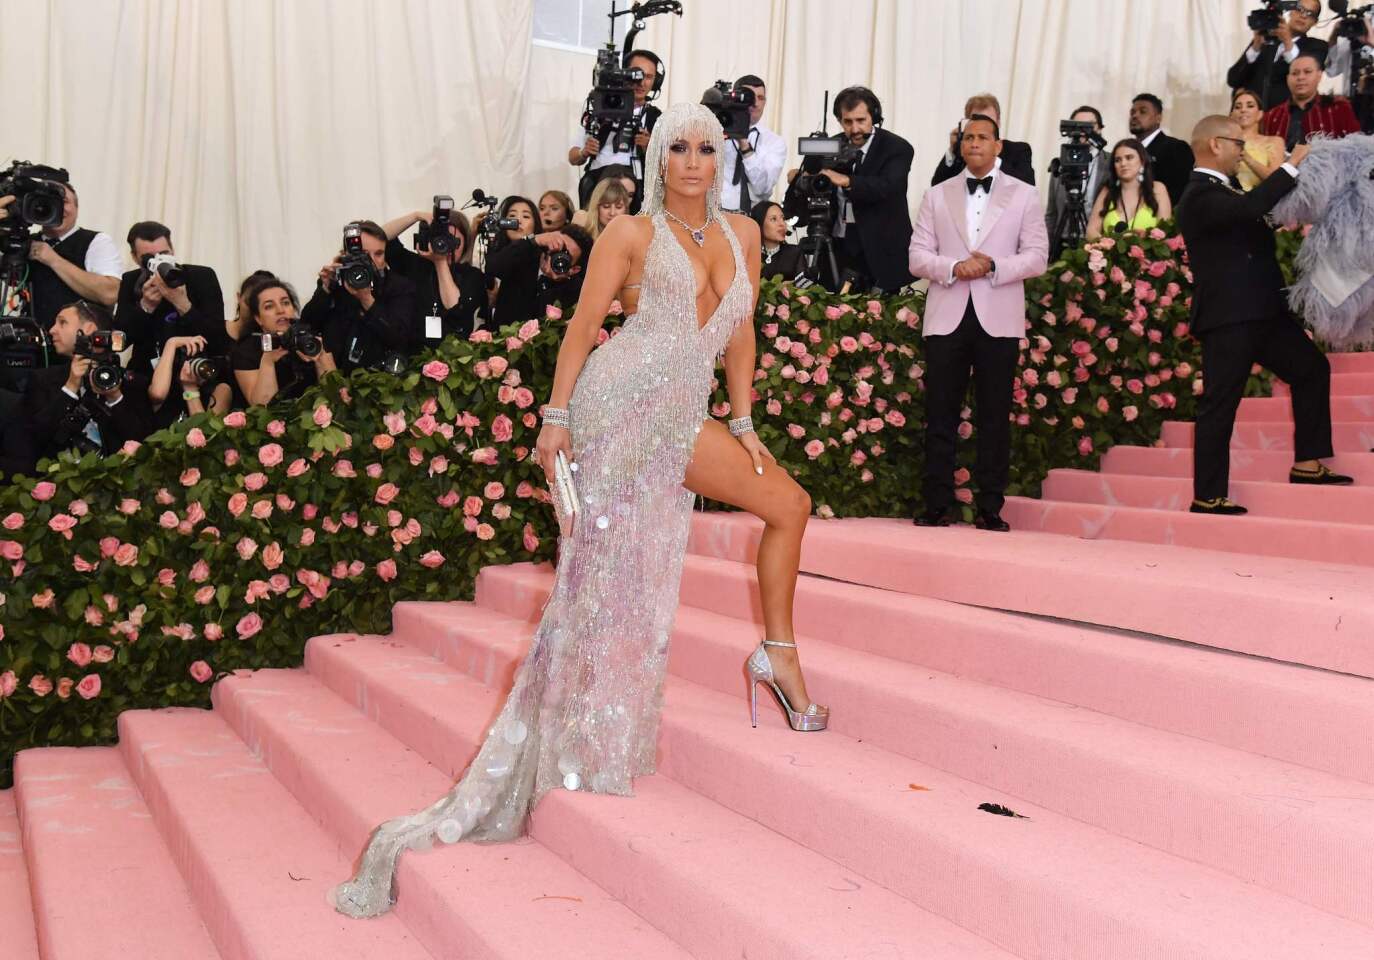 Jennifer Lopez arrives for the 2019 Met Gala at the Metropolitan Museum of Art on May 6, 2019, in New York. - The Gala raises money for the Metropolitan Museum of Arts Costume Institute. The Gala's 2019 theme is Camp: Notes on Fashion" inspired by Susan Sontag's 1964 essay "Notes on Camp".